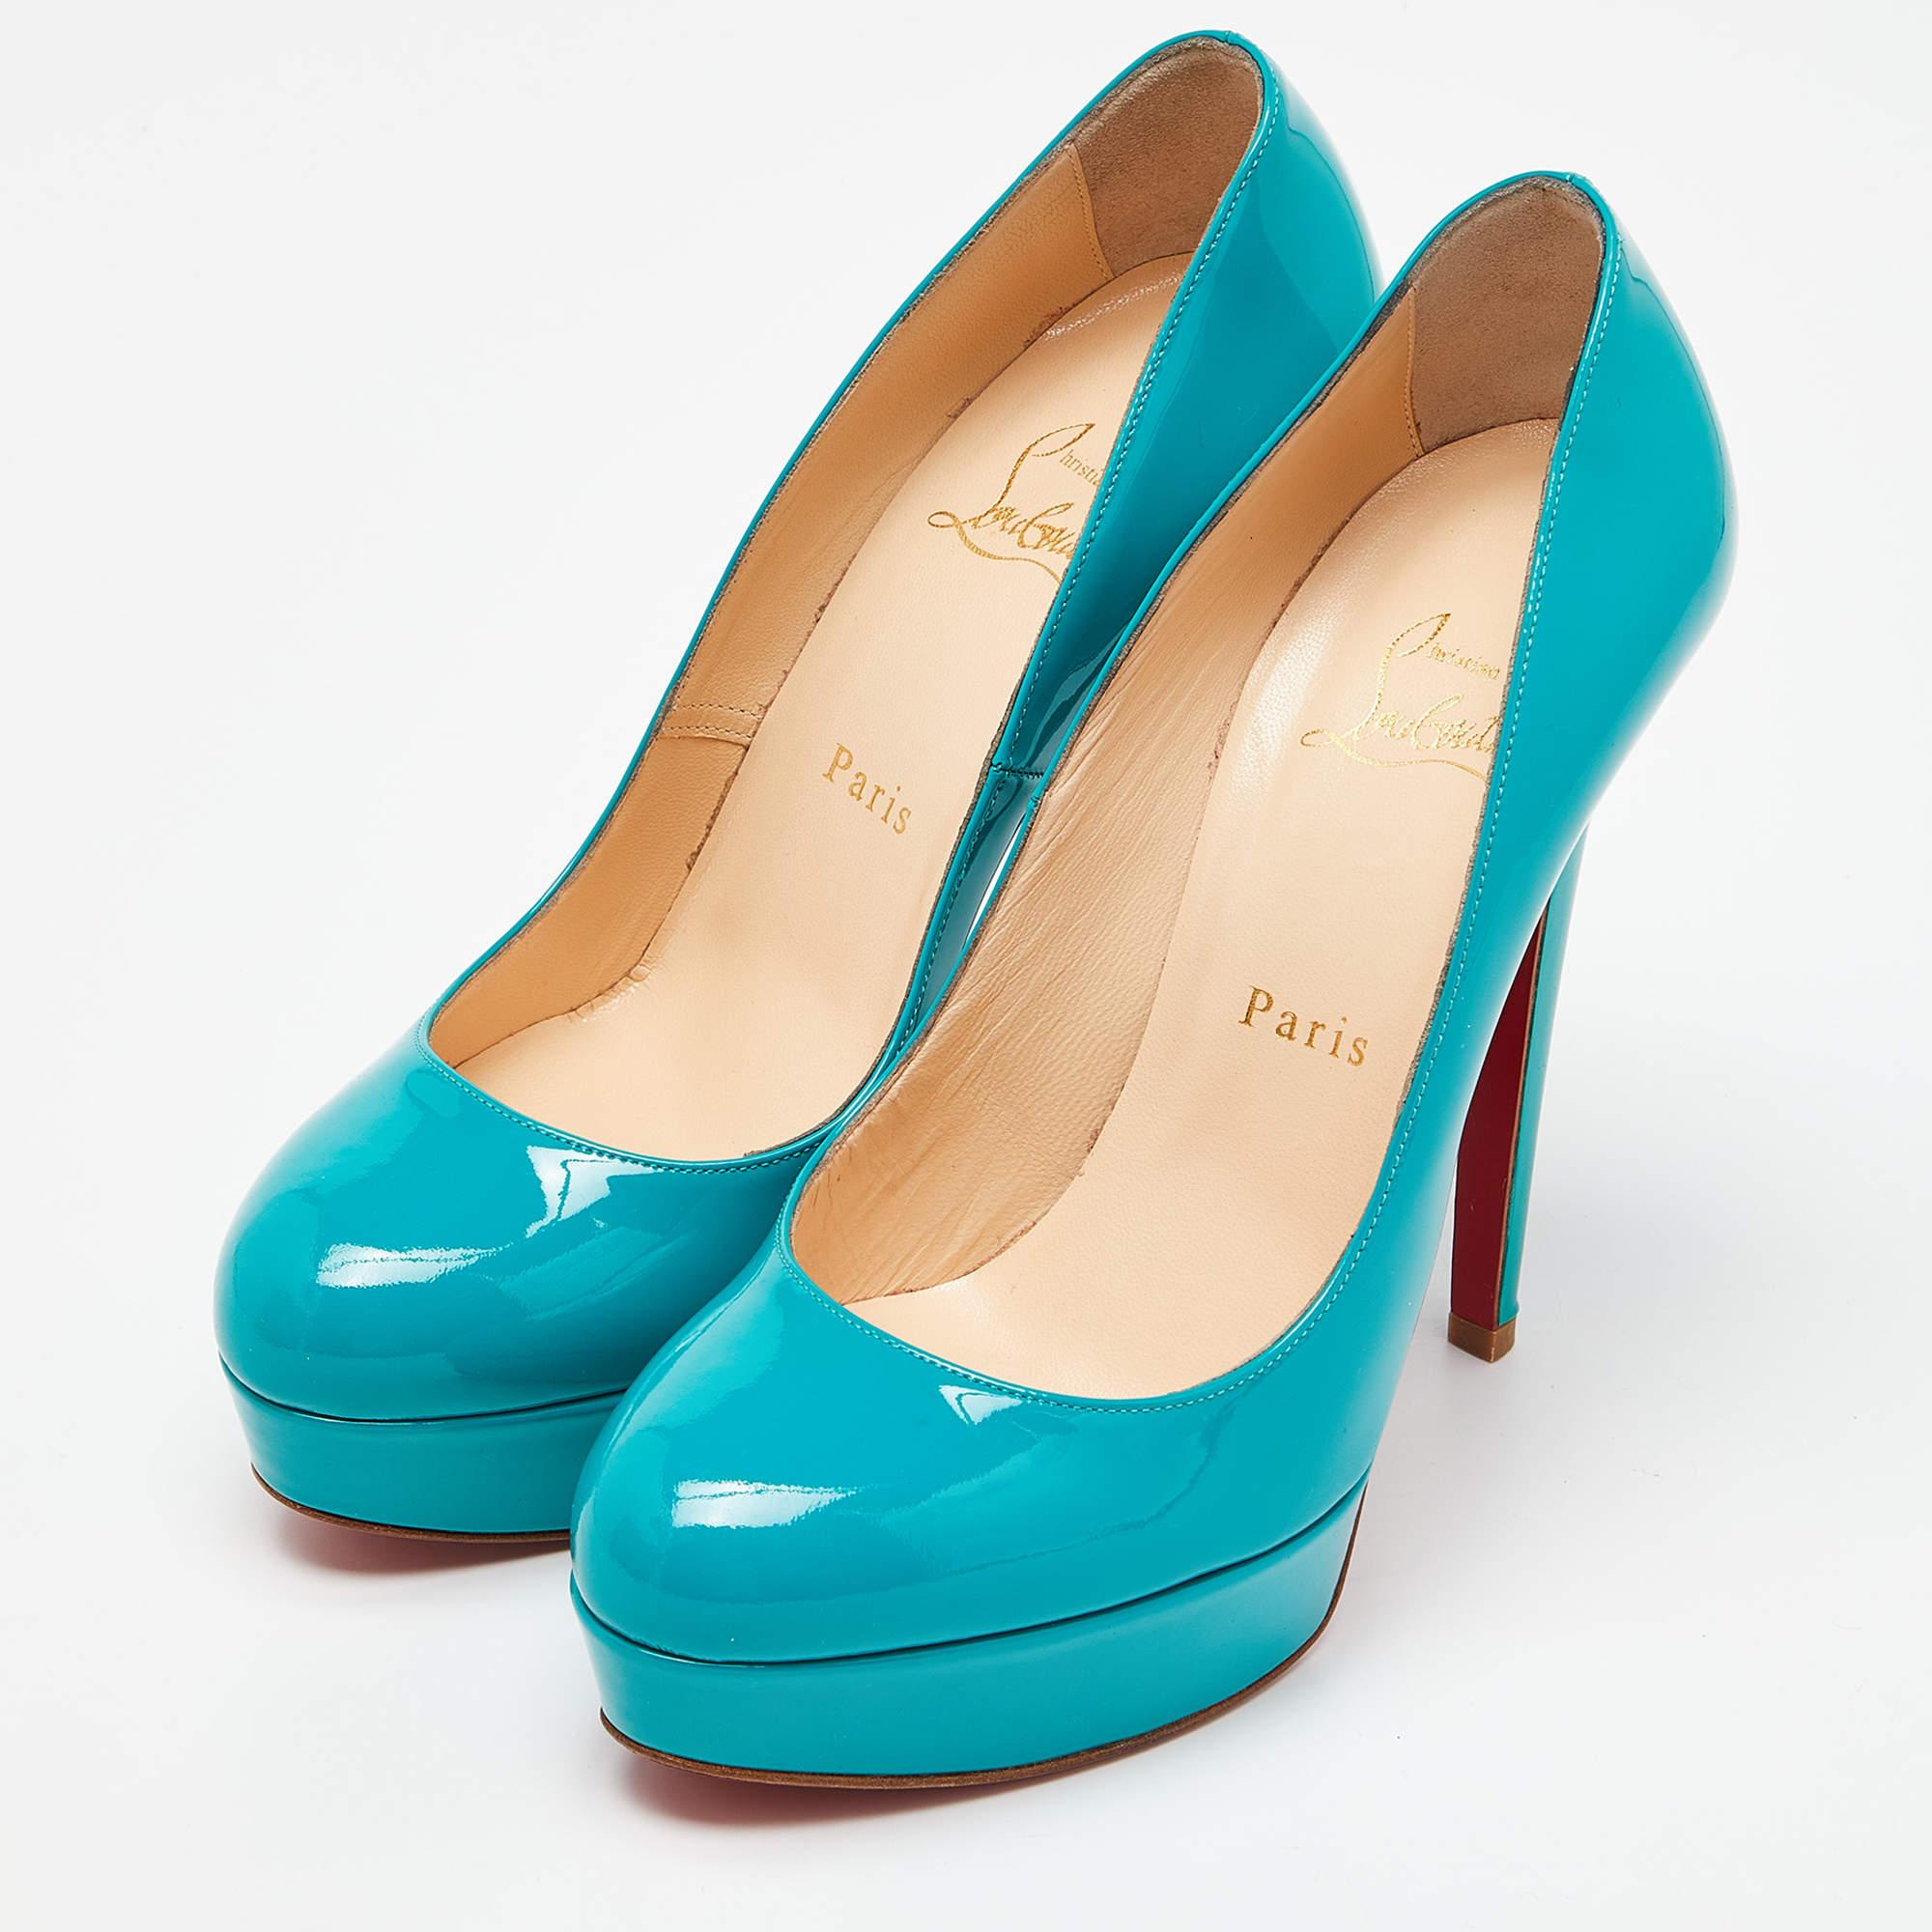 Christian Louboutin Green Patent Leather Bianca Platform Pumps Size 38 For Sale 5